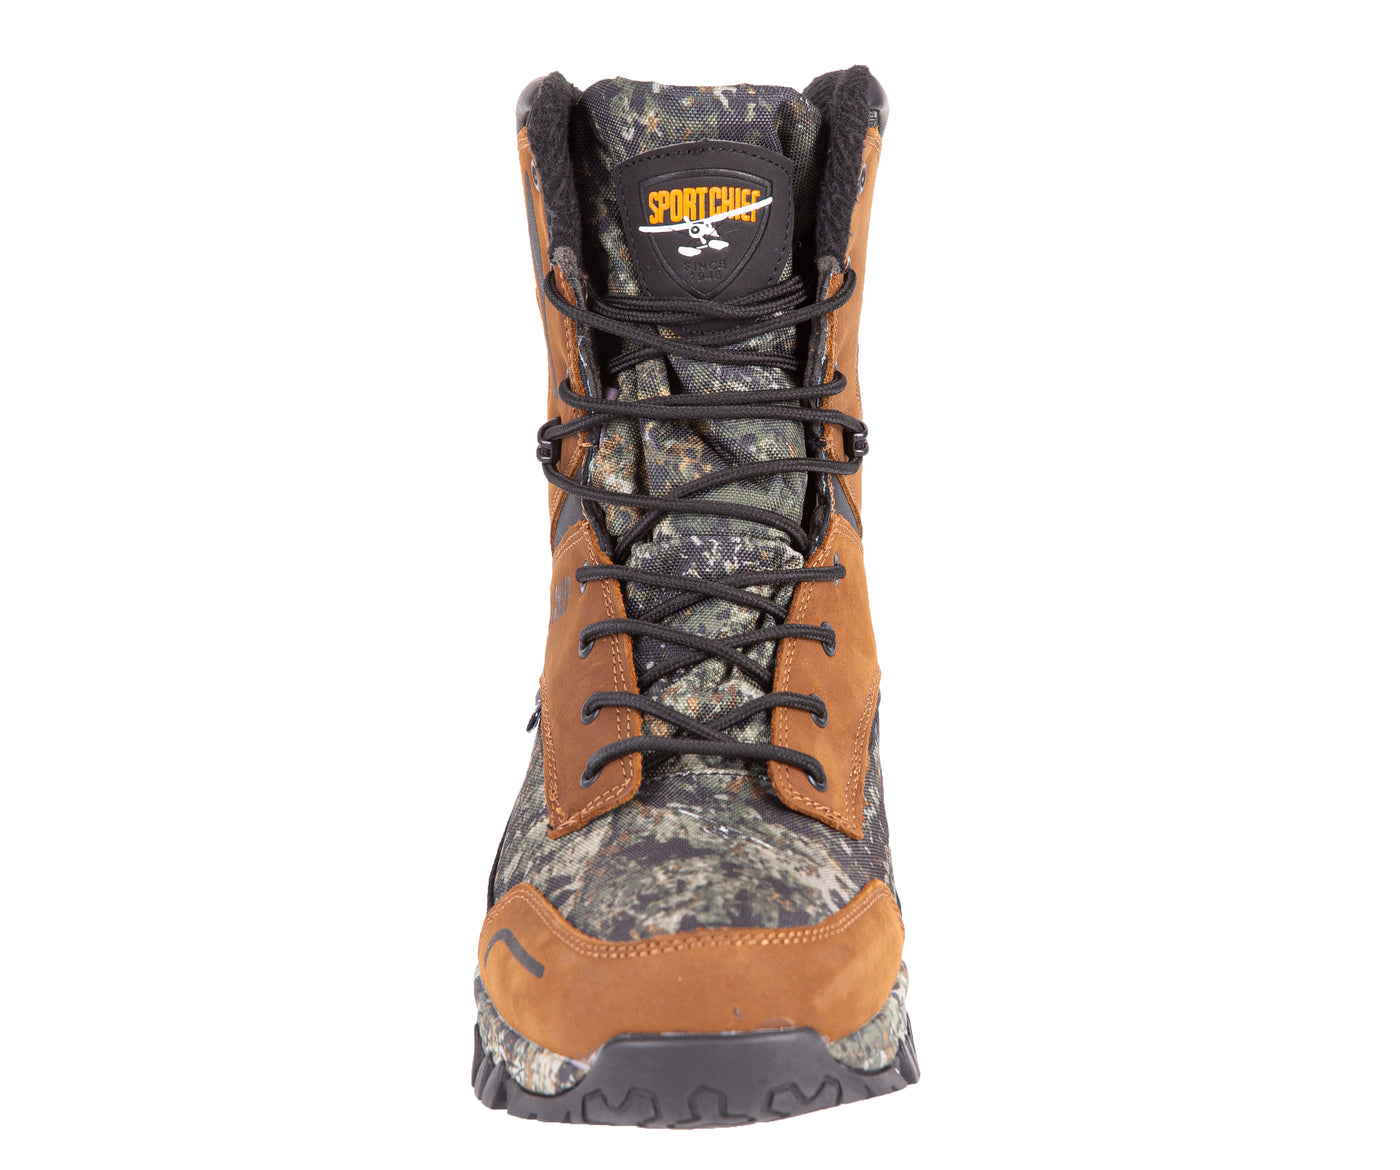 Botte de chasse homme "Panther 3.0" camo The Ripper